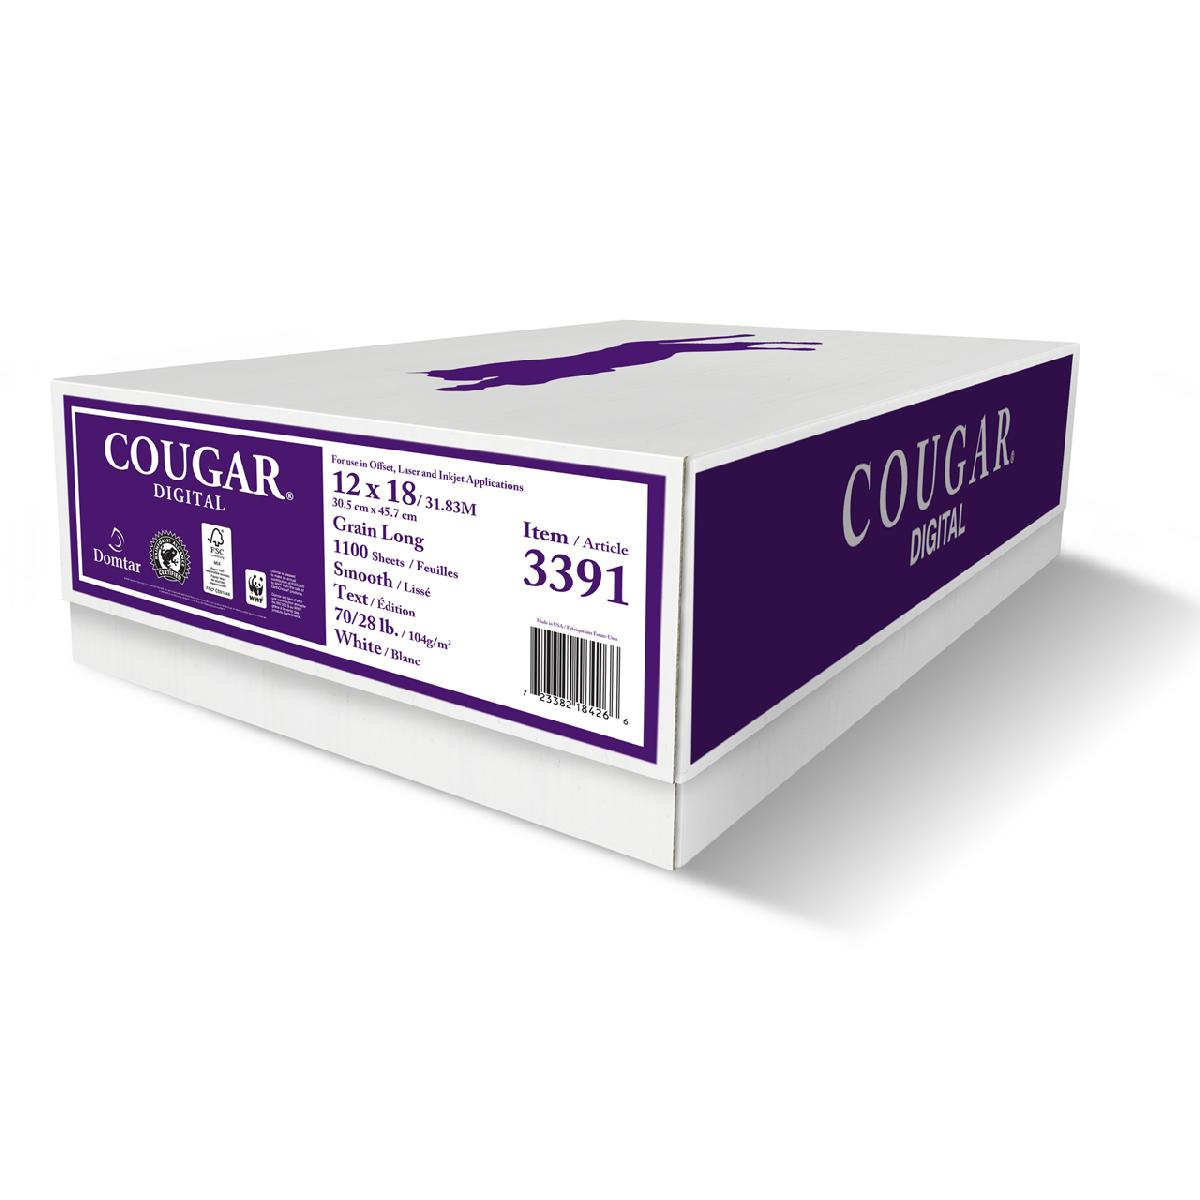 Domtar® Cougar Digital White 60 lb. Smooth Text 12x18 in. 1200 Sheets per Carton